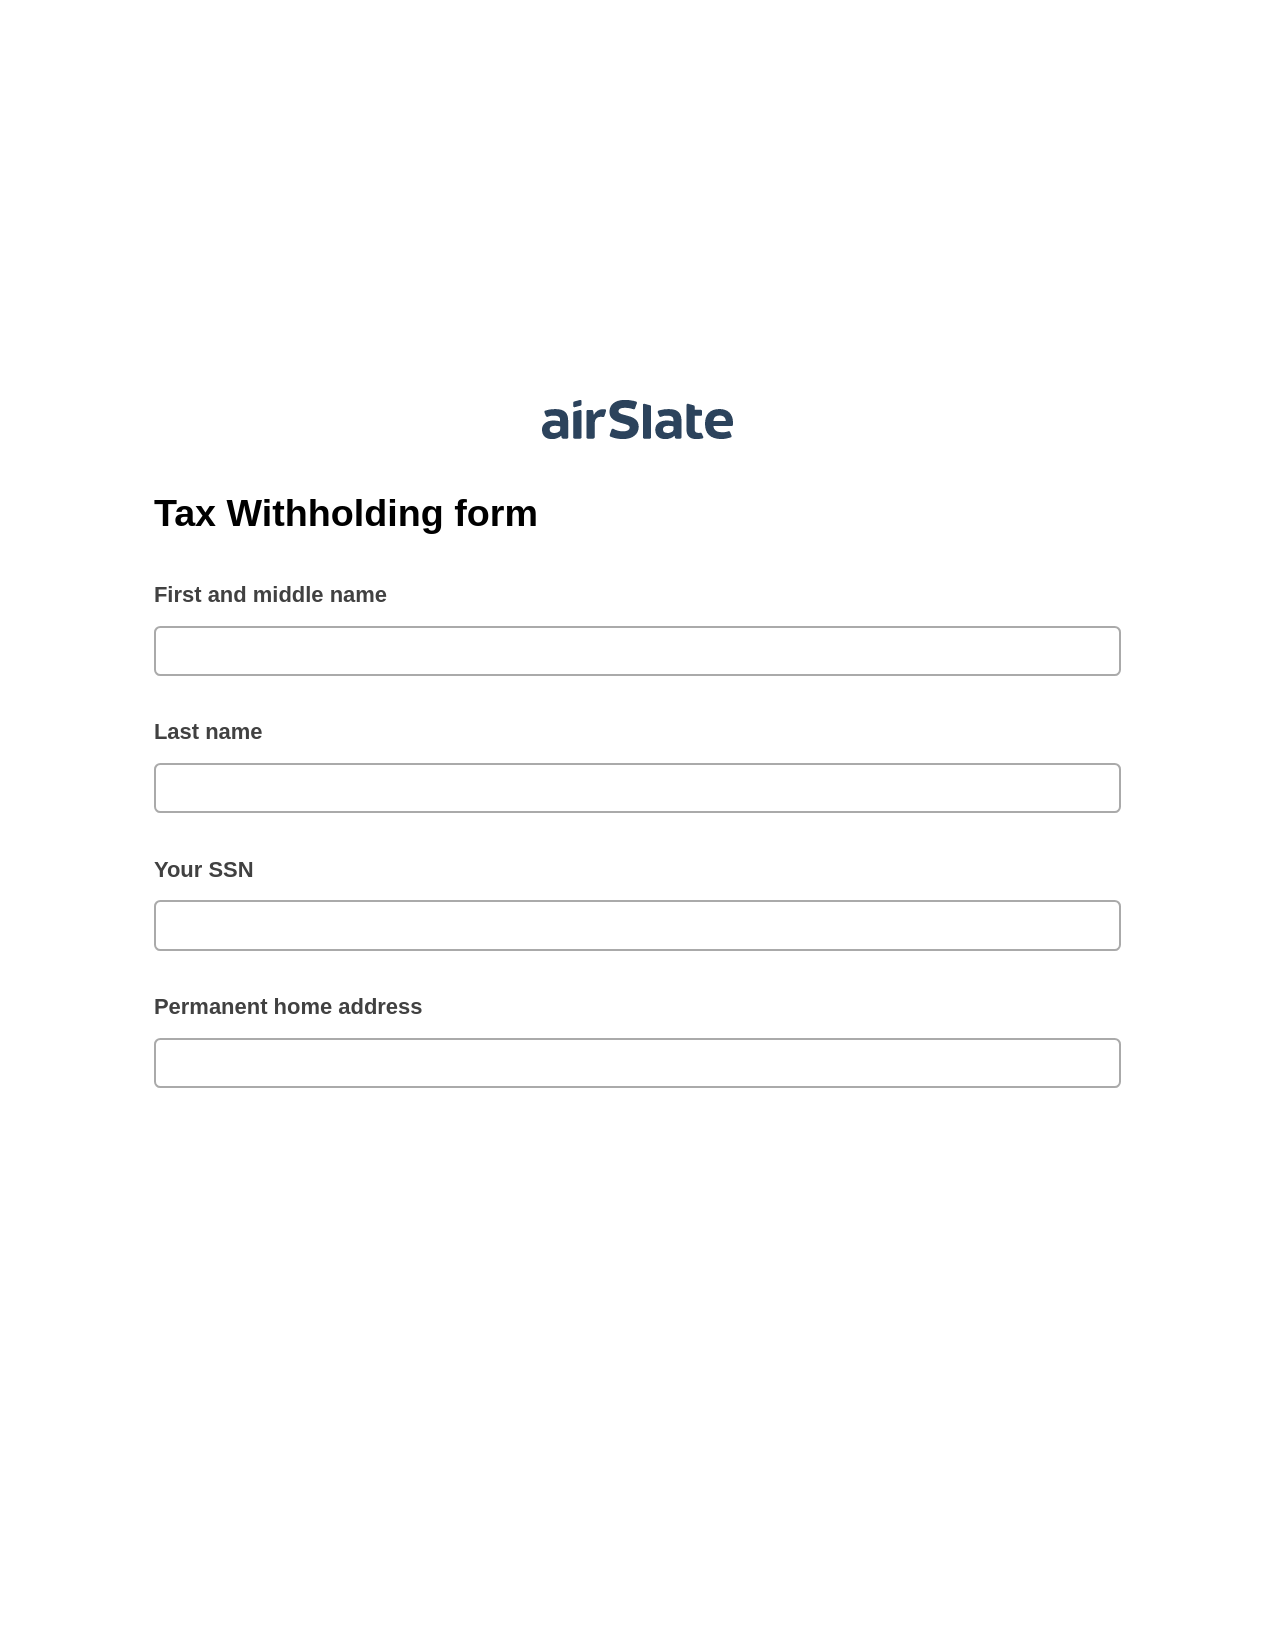 Multirole Tax Withholding form Pre-fill from CSV File Bot, Set Signature Type Bot, Archive to SharePoint Folder Bot